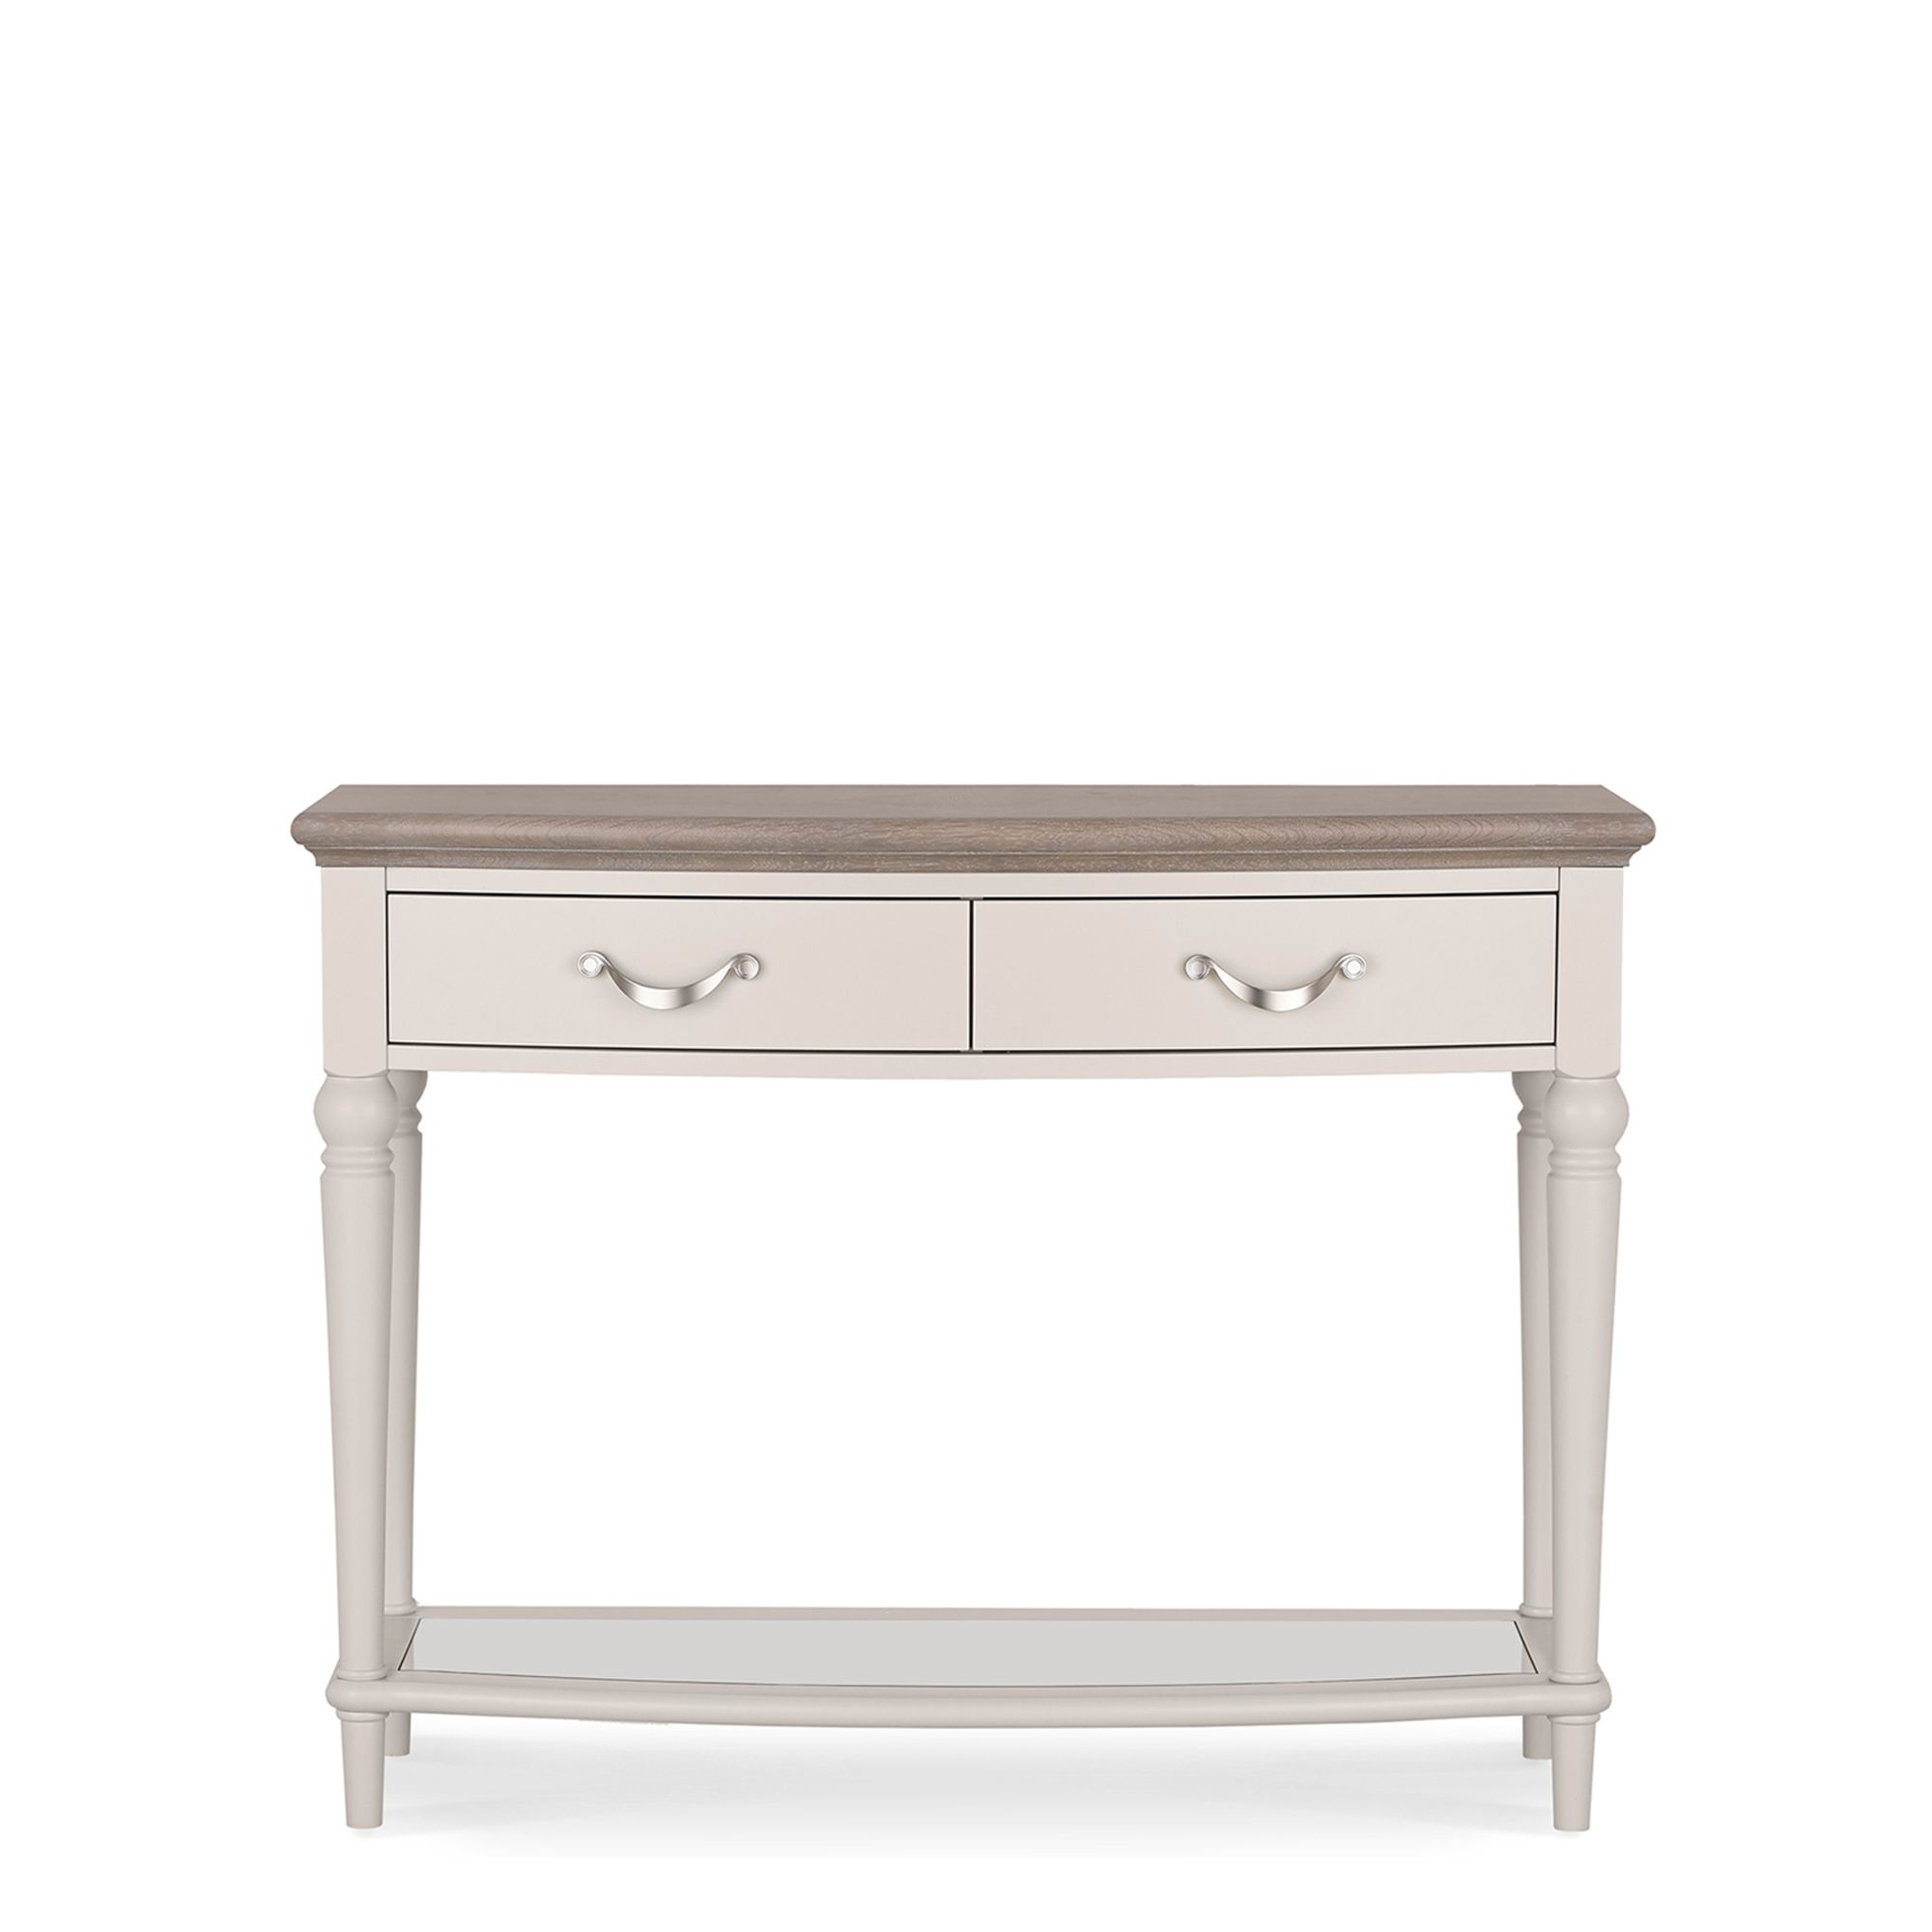 Chateau – Grey Washed Oak Console Table – Fishpools In Gray Wash Console Tables (View 20 of 20)